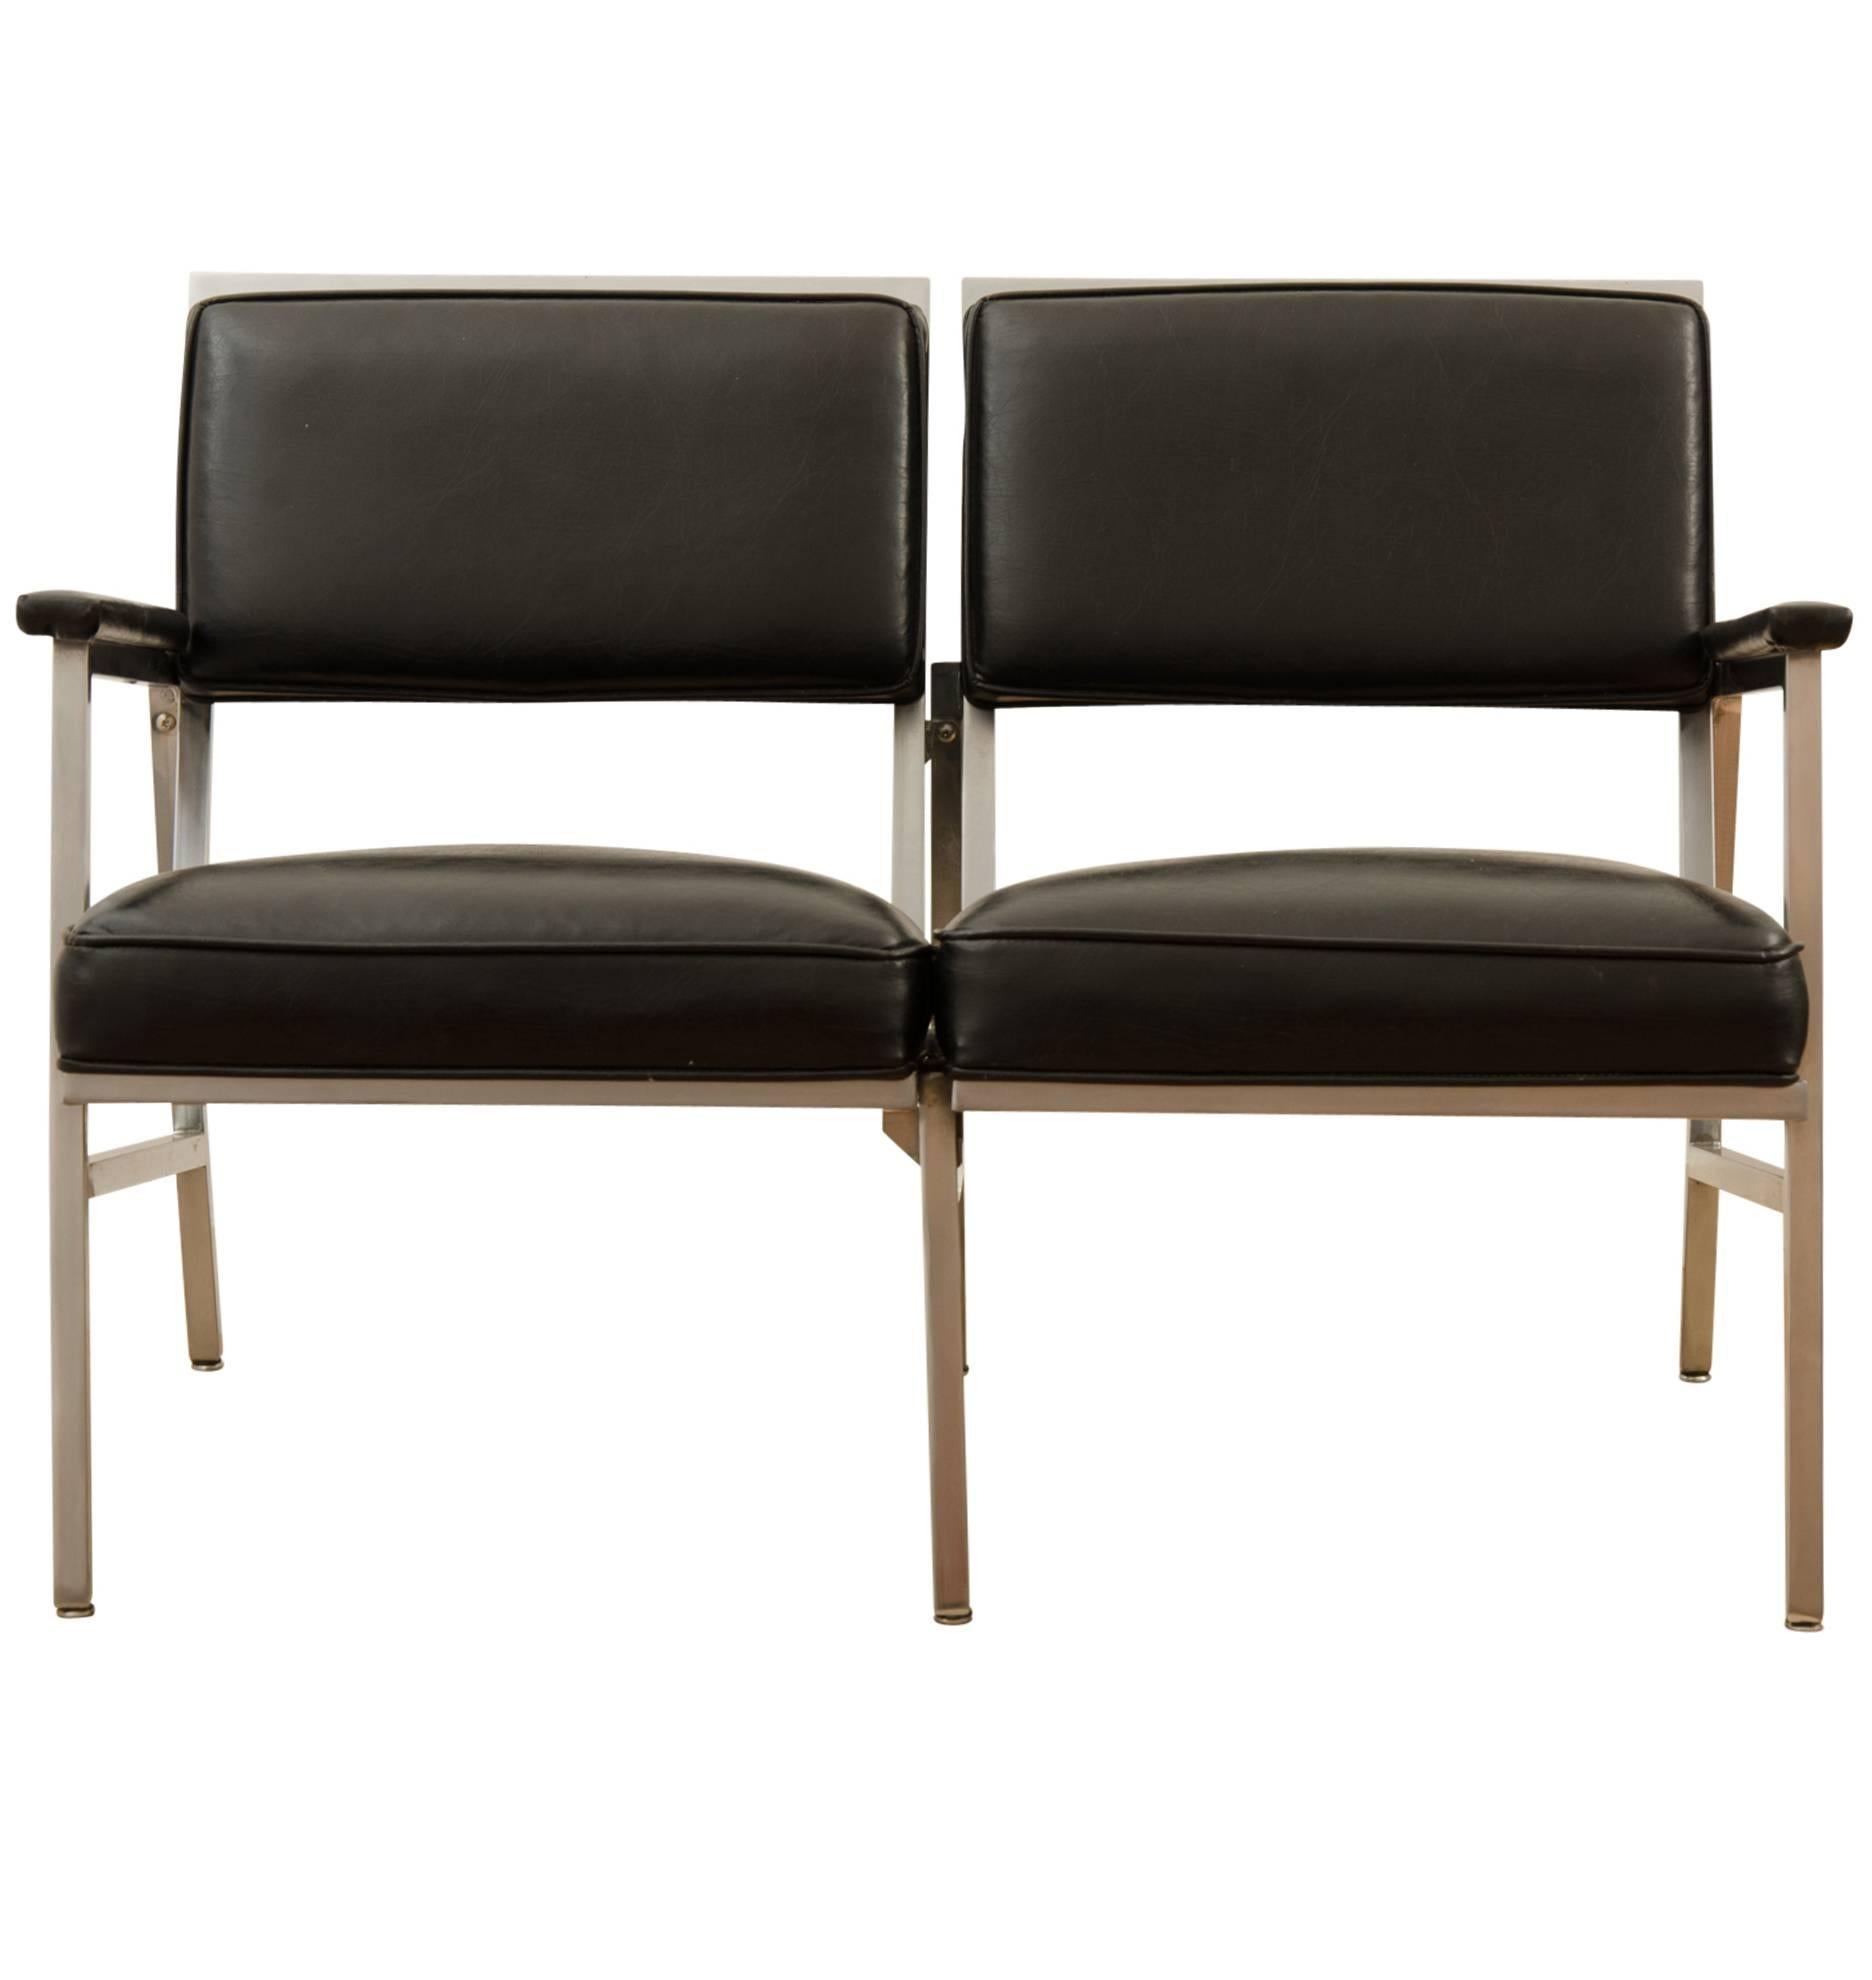 Salvaged from Mid-Century living rooms, barbershop waiting rooms and 1930s night clubs, our collection of vintage lounge chairs comprises some of our favorite historic styles, techniques and materials including tufted upholstery, tubular chrome and